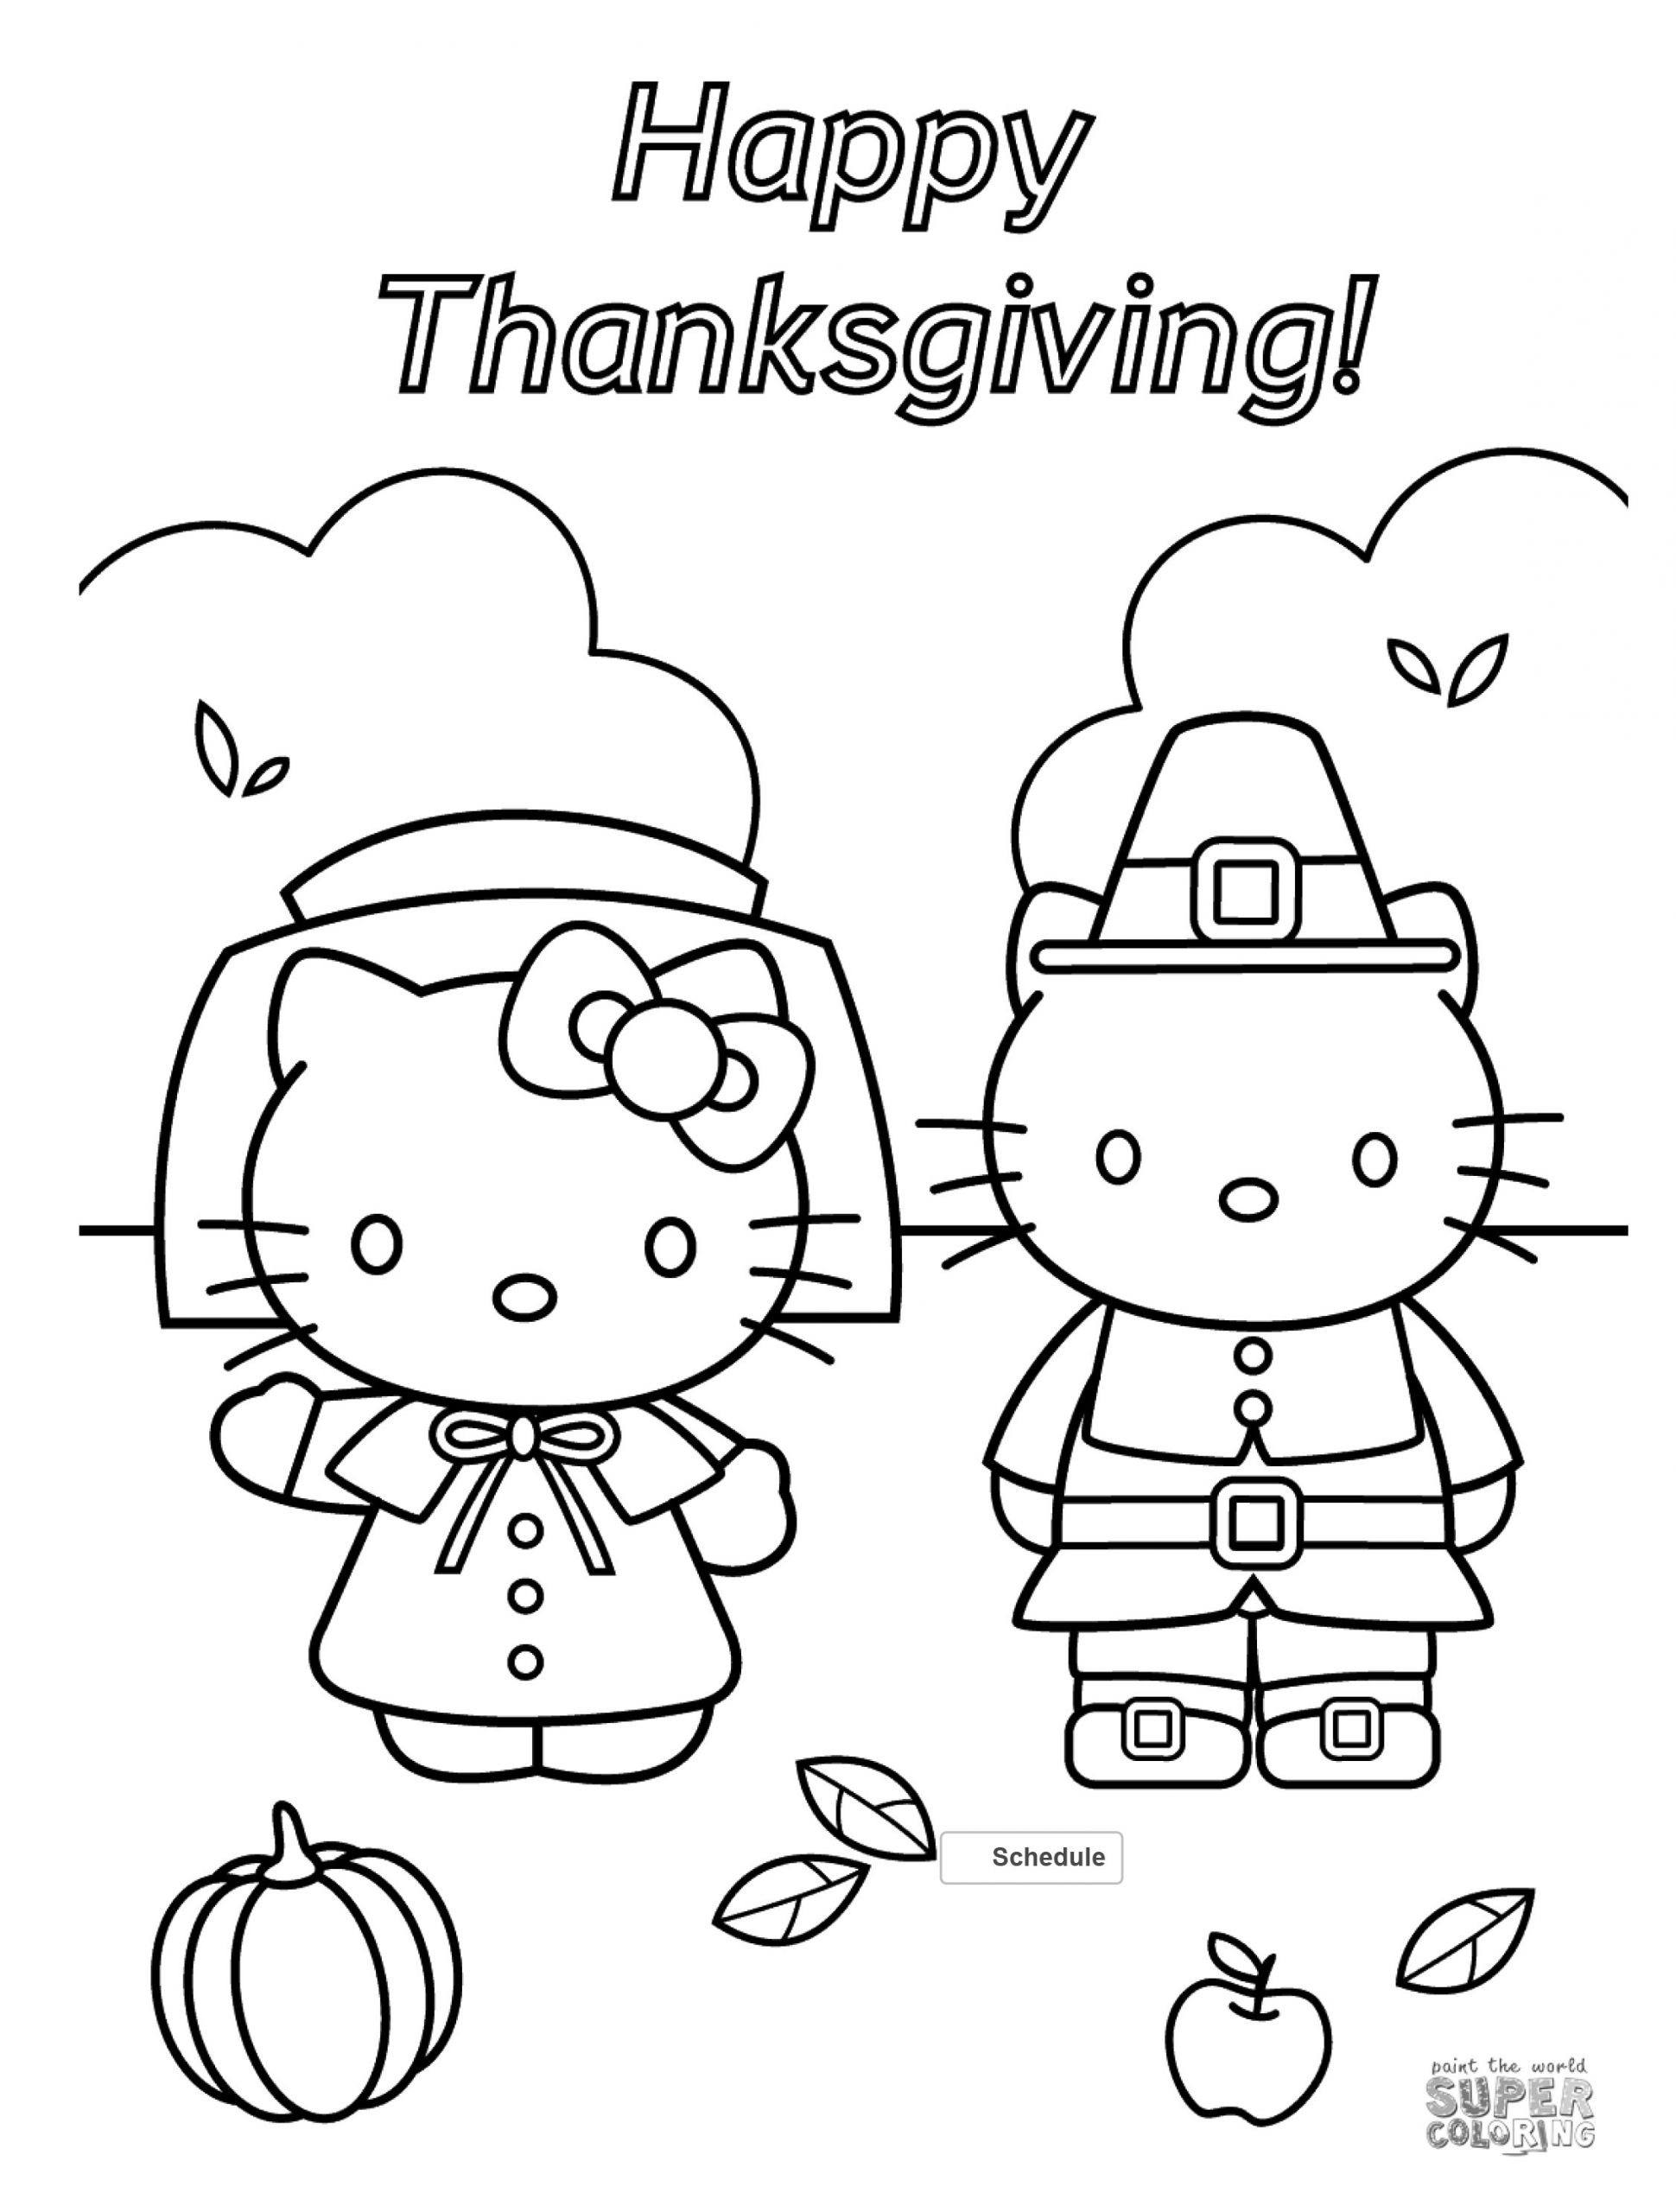 Thanksgiving Coloring Pages Kids
 FREE Thanksgiving Coloring Pages for Adults & Kids